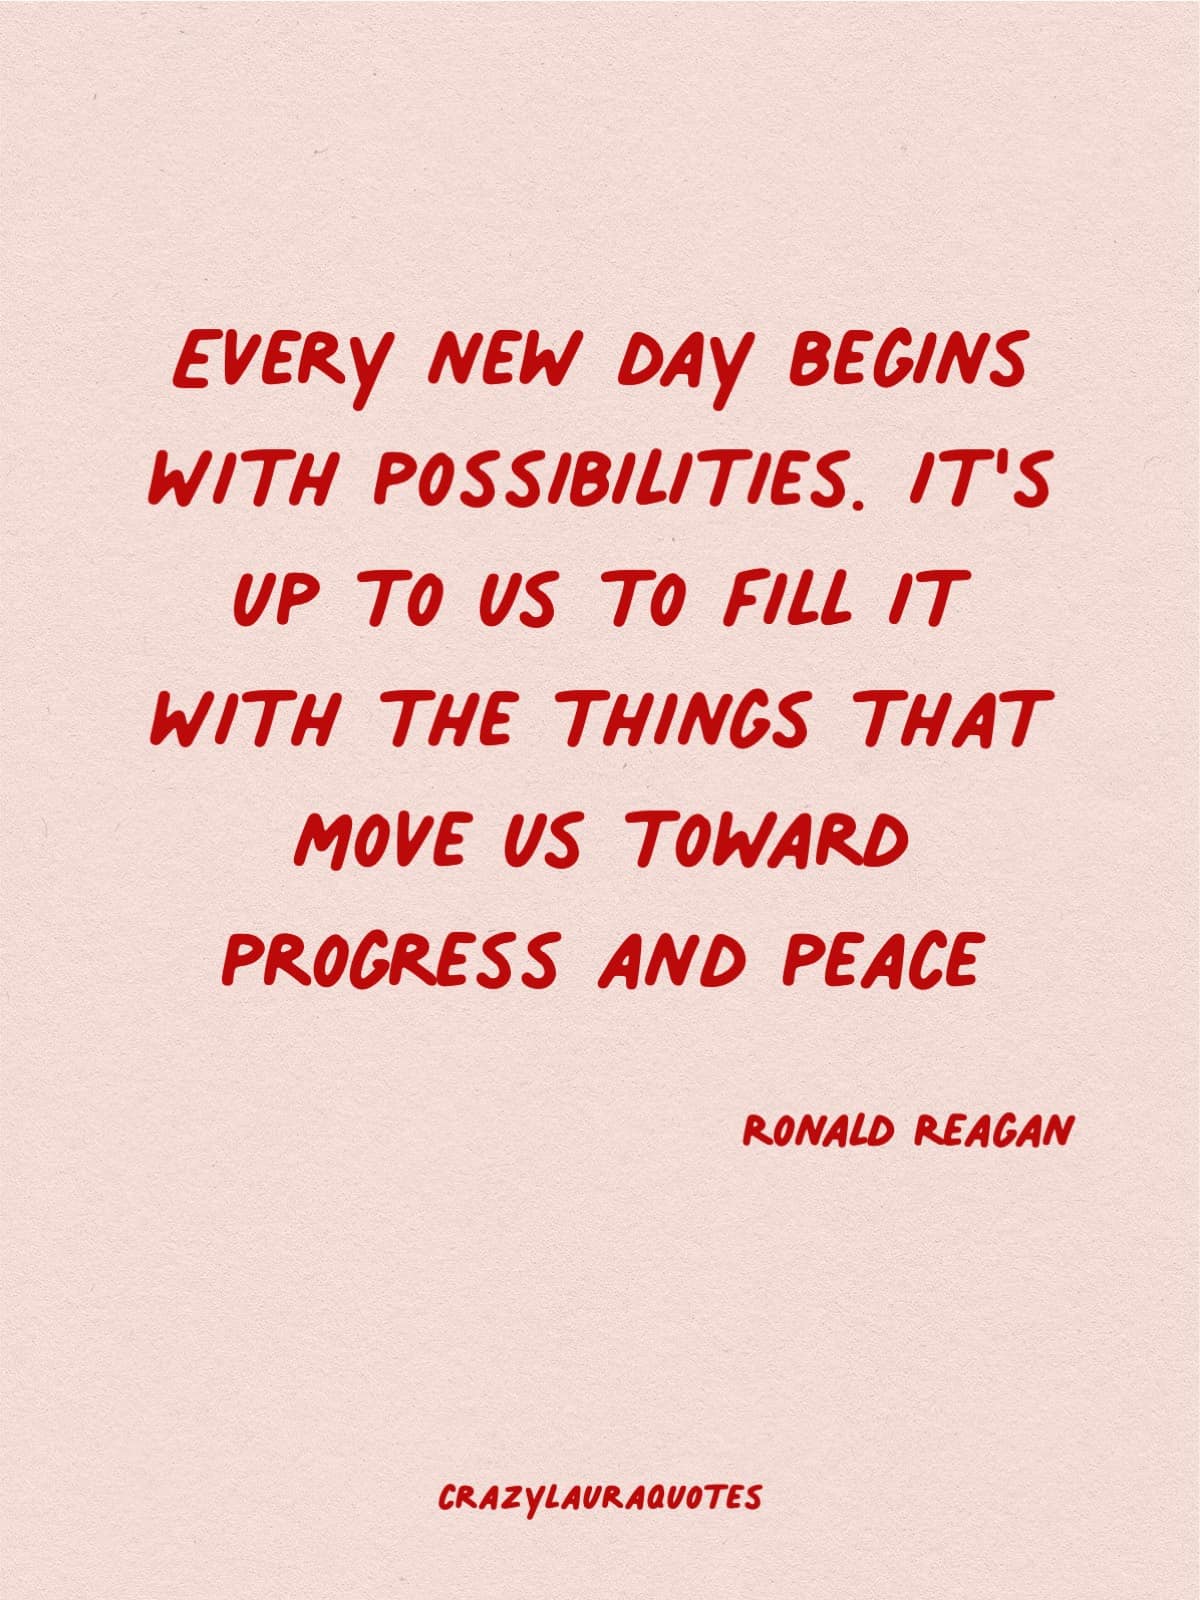 new days bring peace and progress inspiration